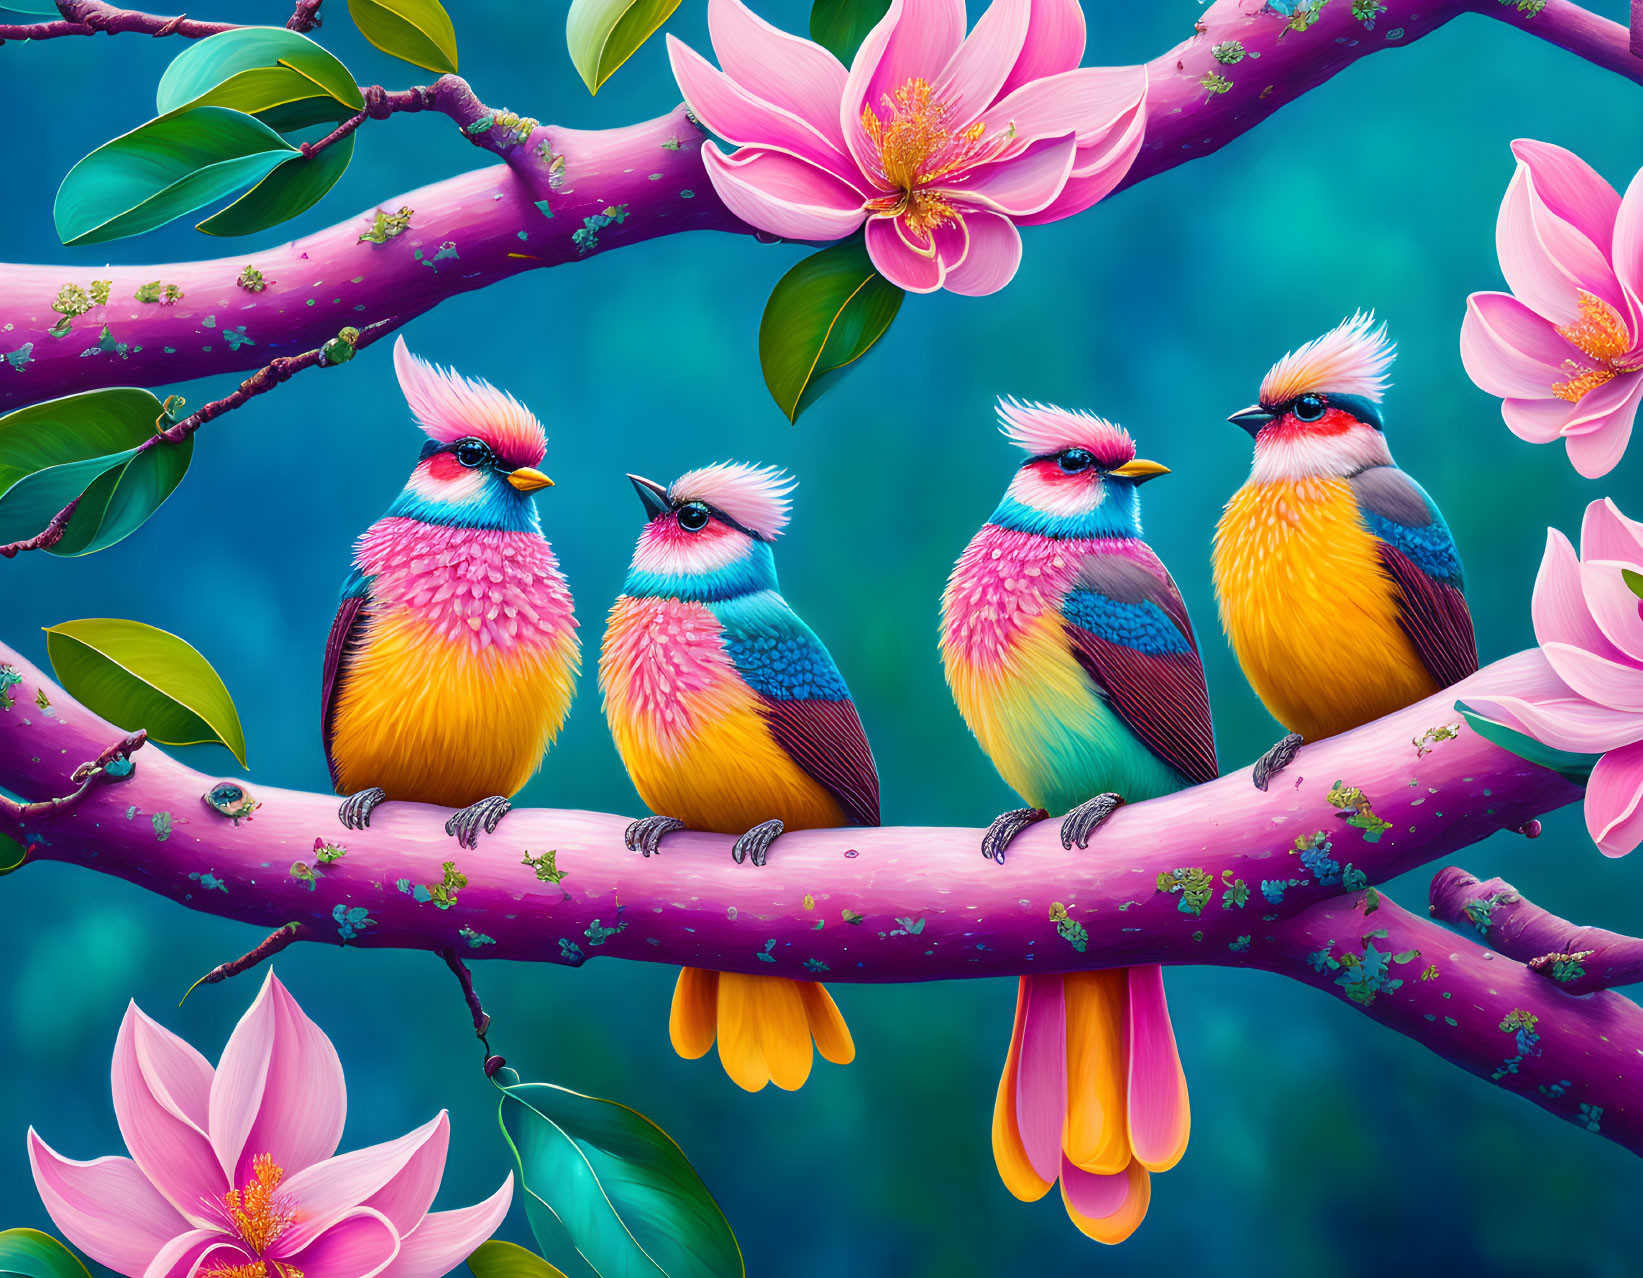 Colorful Birds Perched on Pink Blossomed Branch with Teal Background